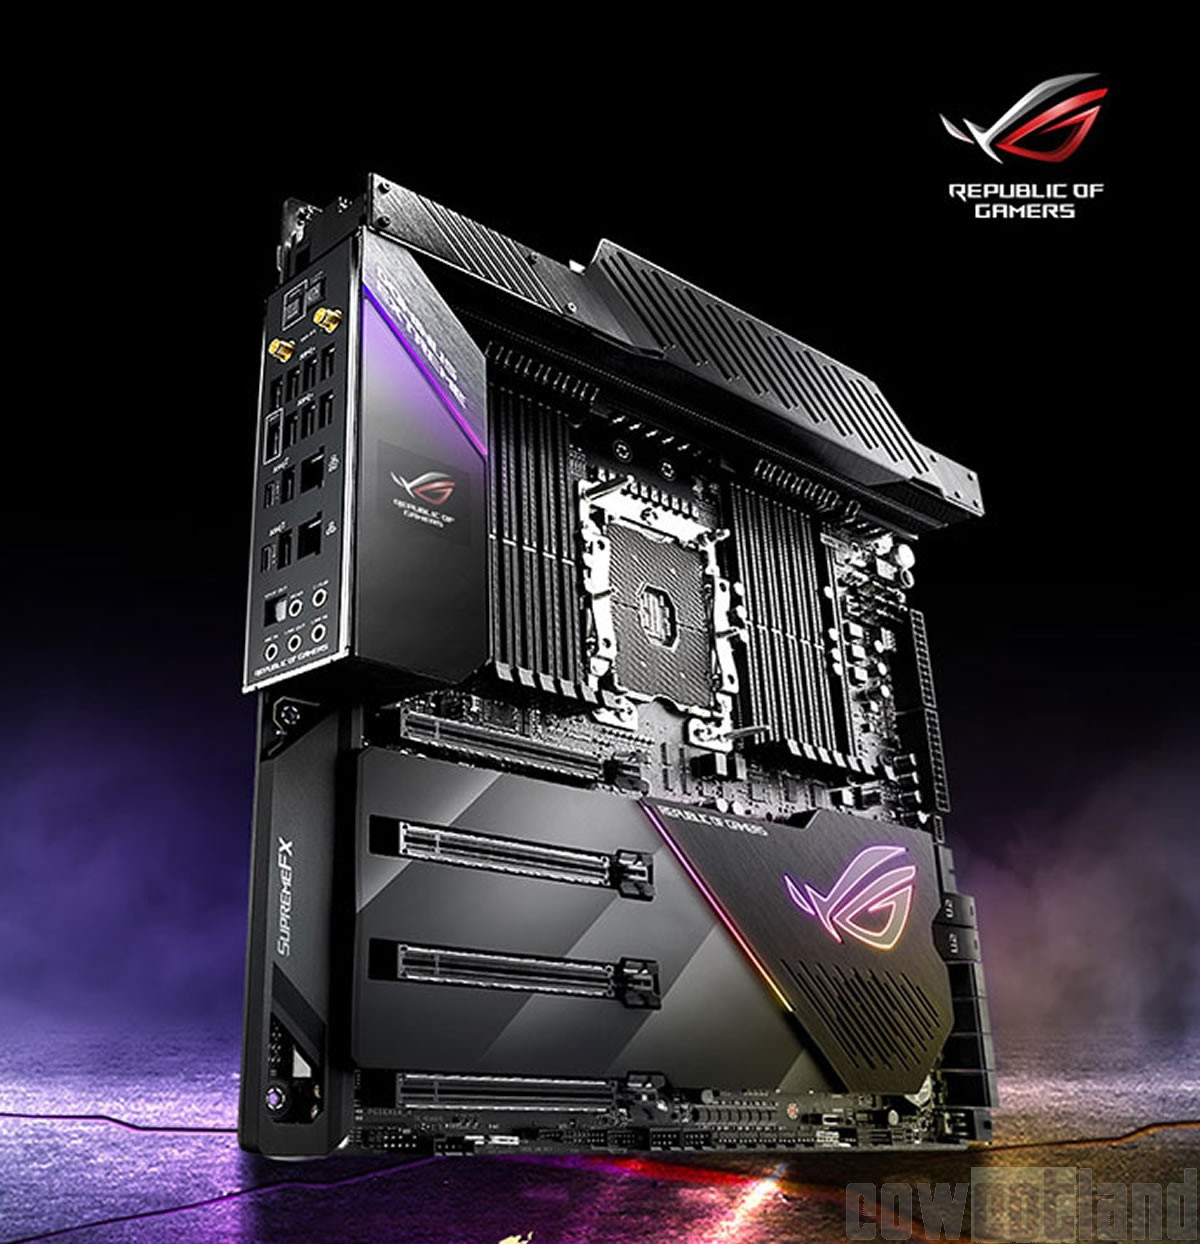 At 1550 Asus Rog Dominus Most Expensive Client Segment